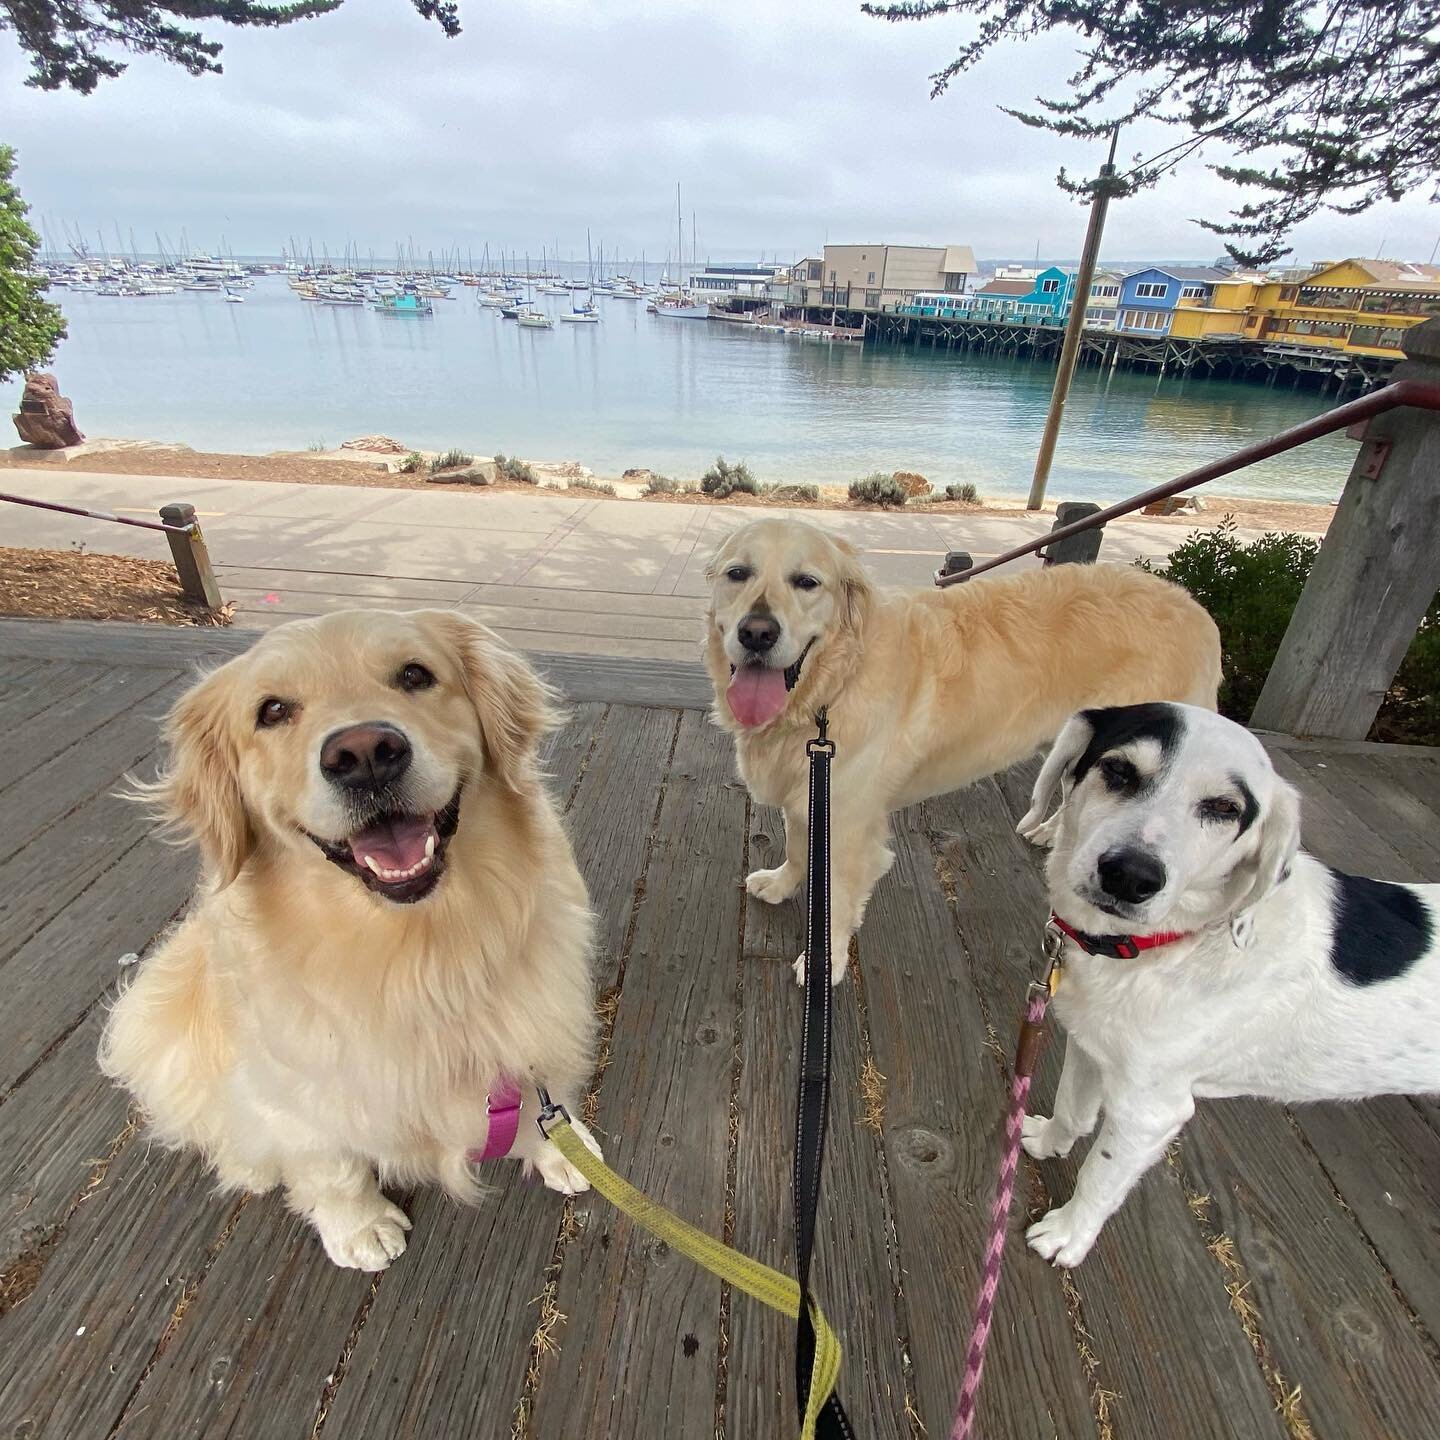 We have a beautiful coastline! With #goldenretriever smiles! 😍 &amp; all the cute faces 🥰